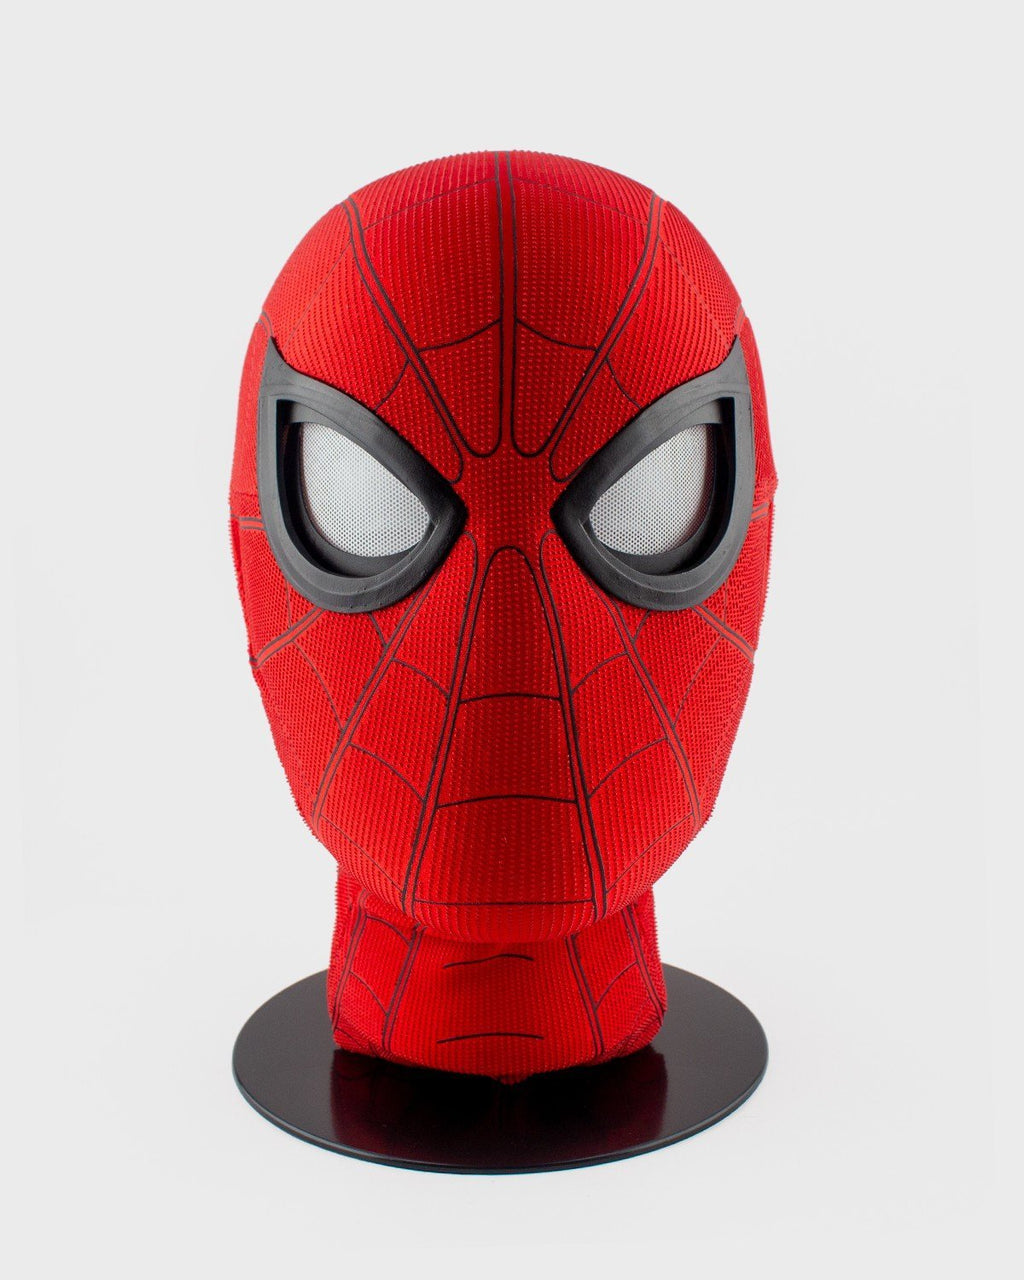 Spider Man Mask With Mechanical Lenses.